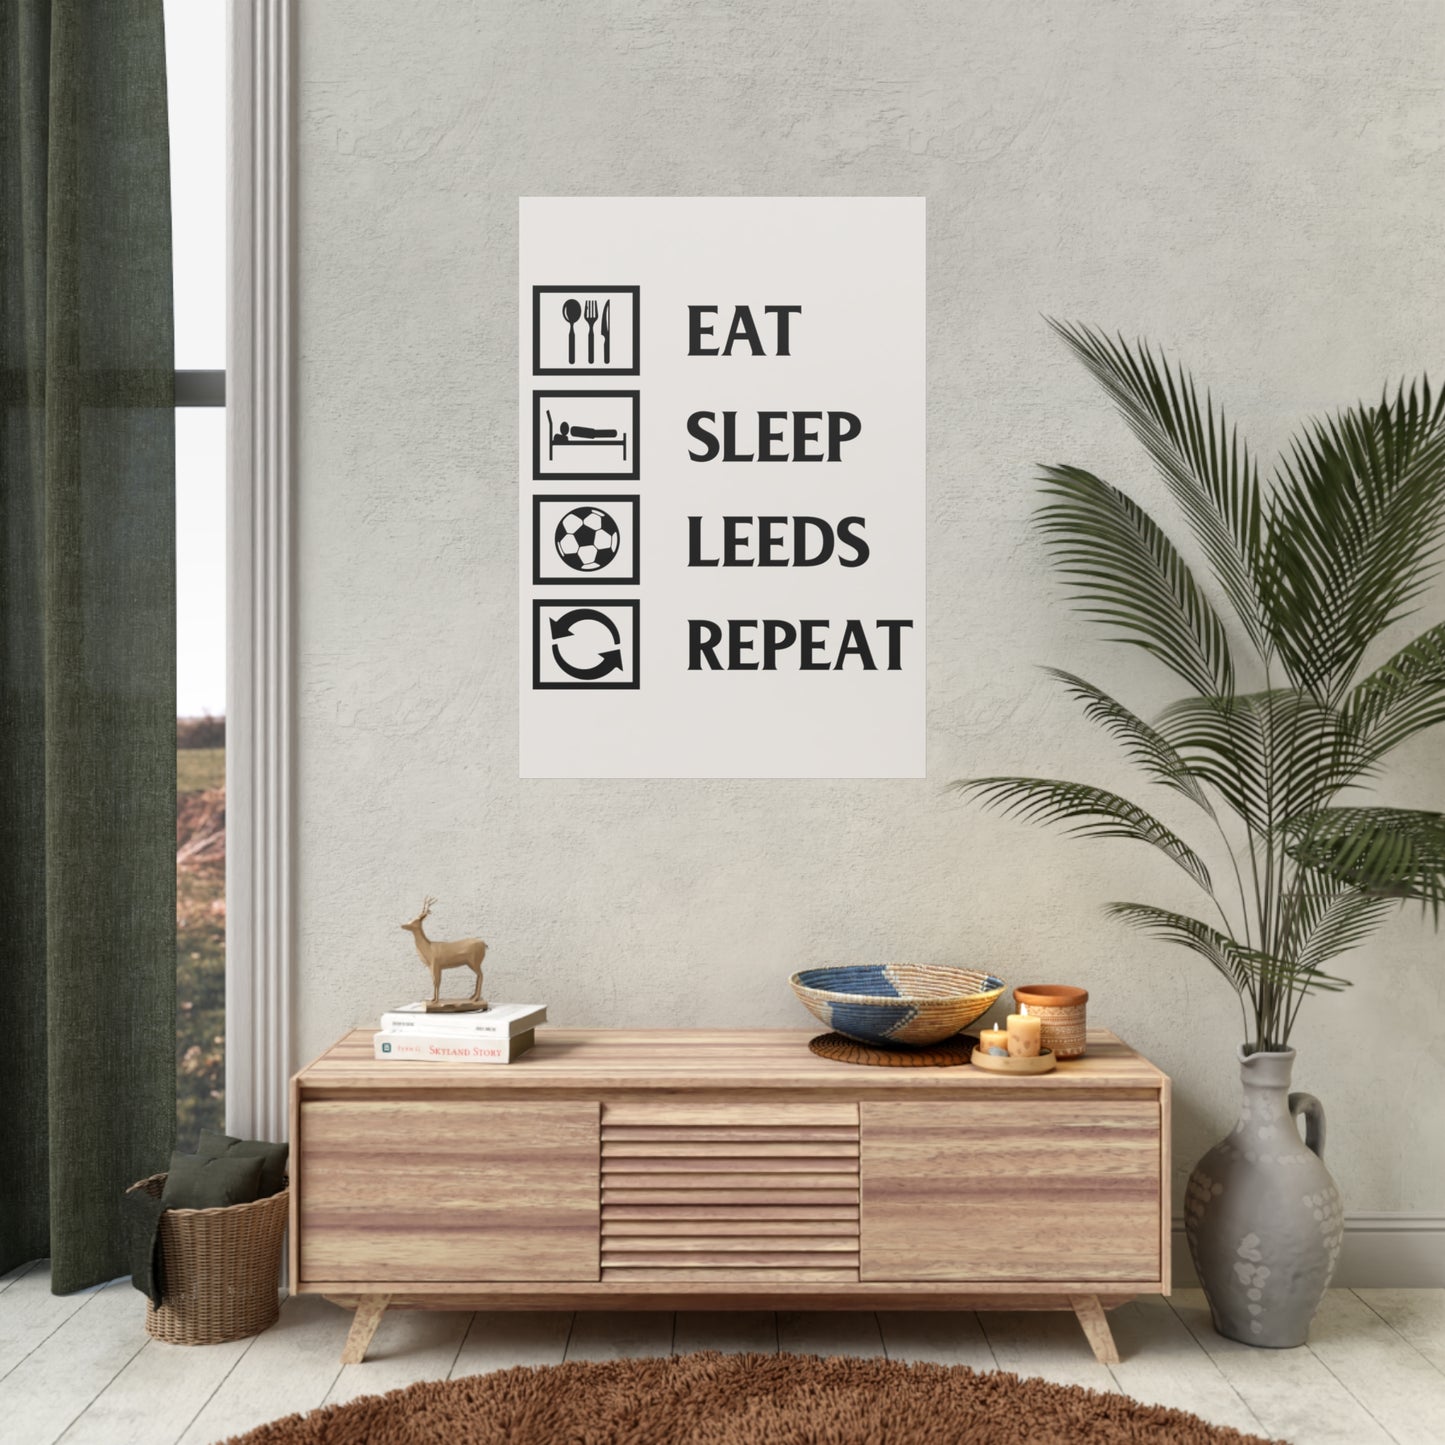 Eat sleep leeds repeat poster for leeds united fans